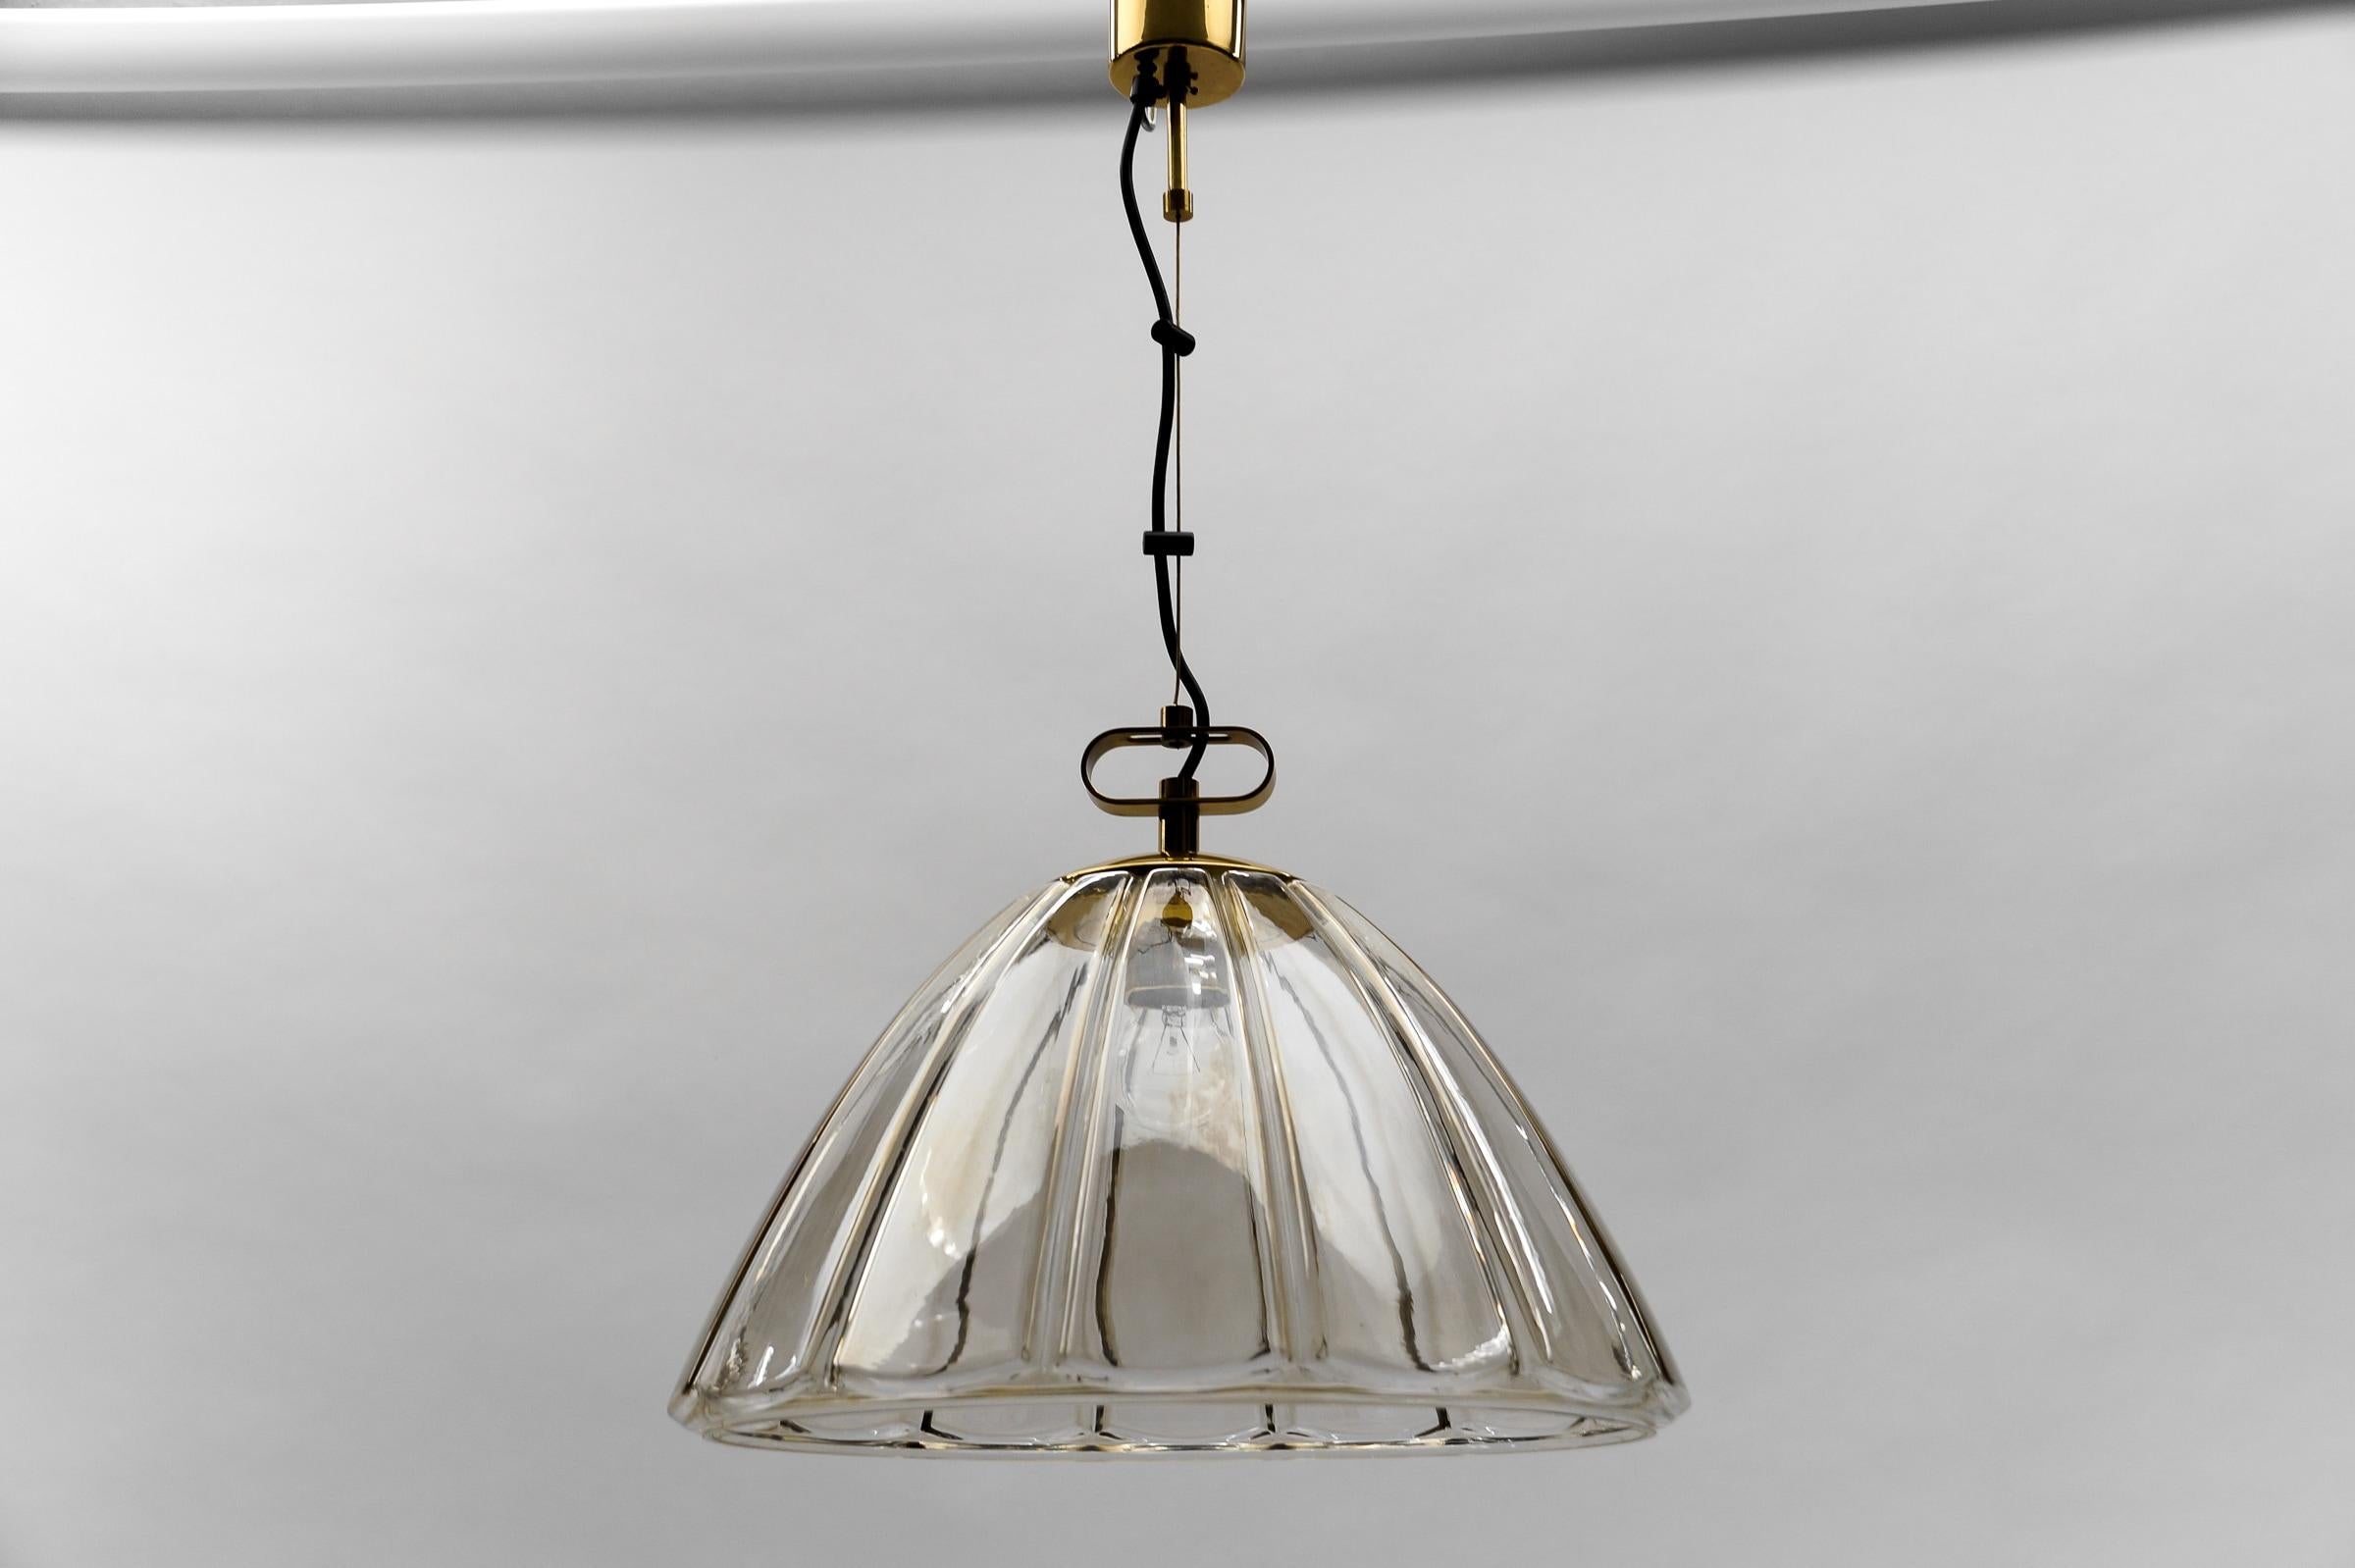 Elegant Mid-Century Modern Smoked Glass Pendant Lamp by Limburg, 1960s Germany   In Good Condition For Sale In Nürnberg, Bayern